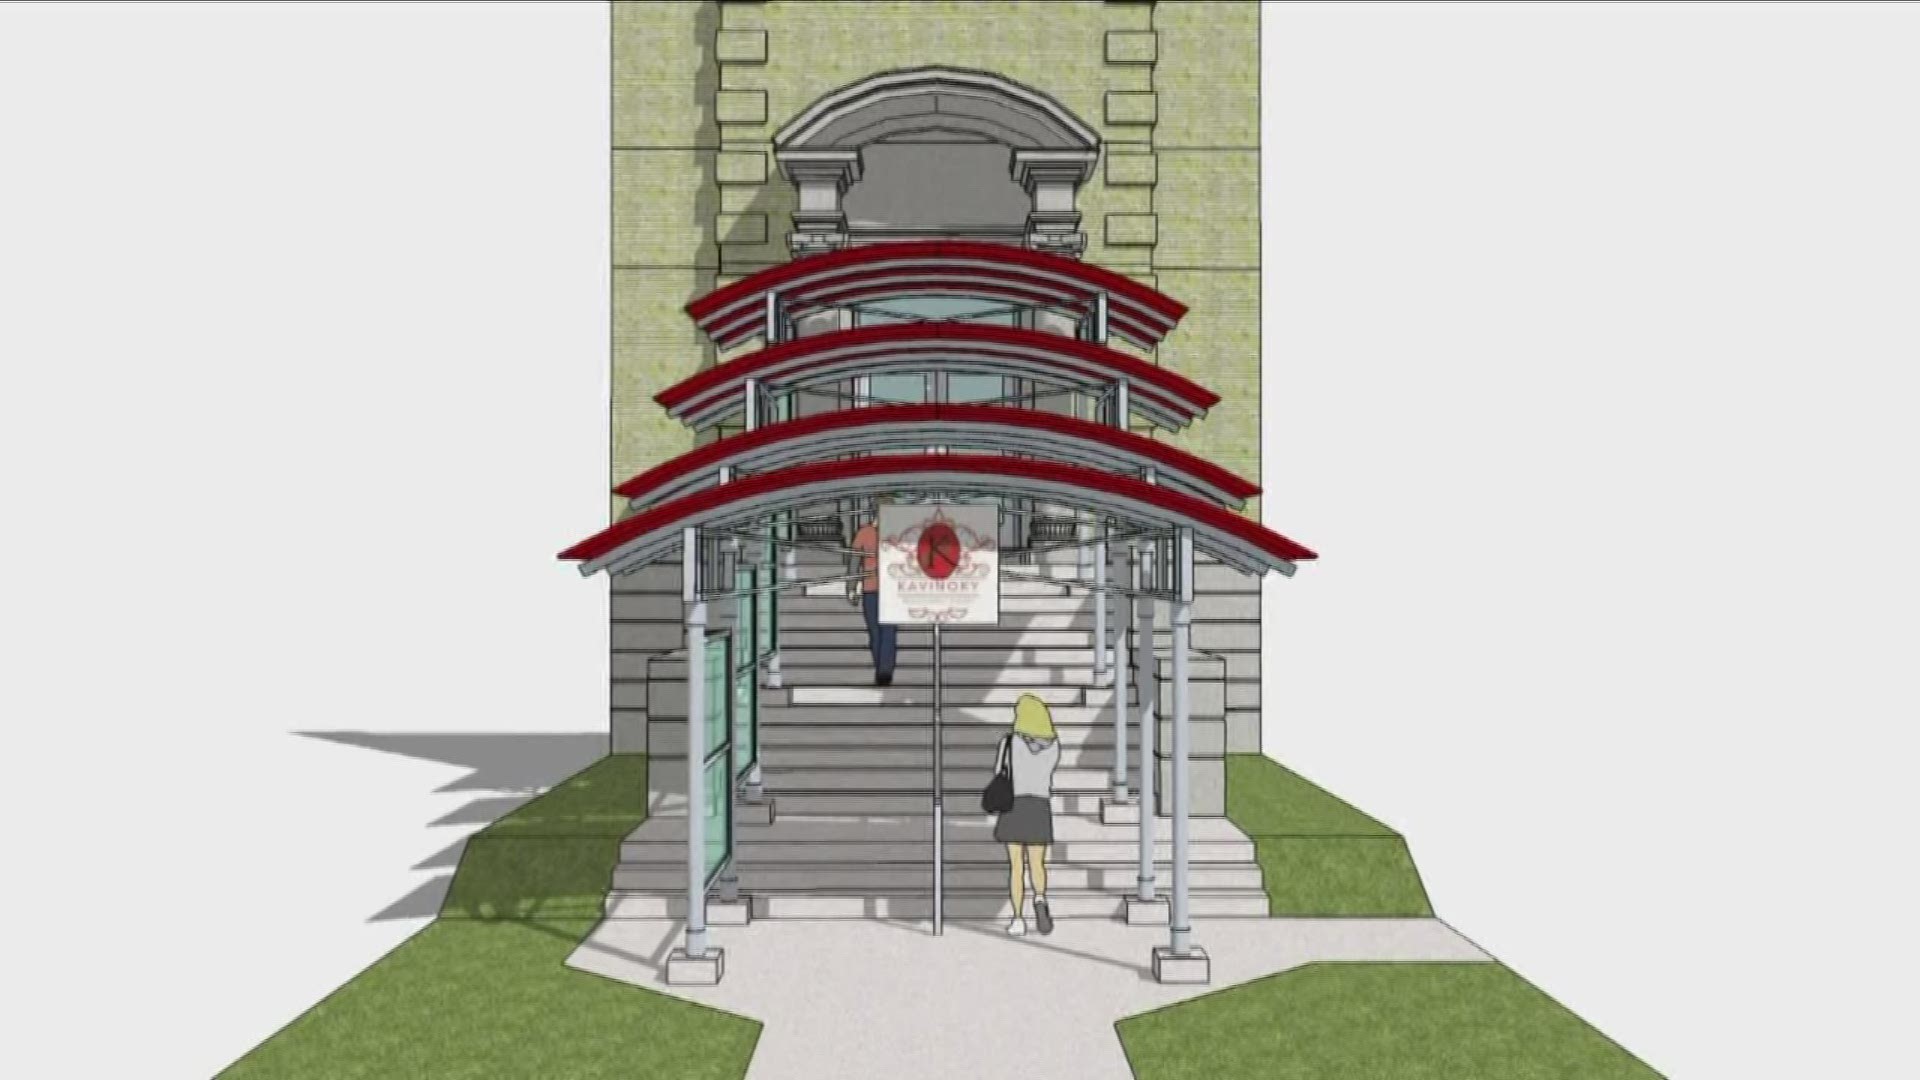 They will use funding for a Broadway-style covered entryway, as well as updated seats and a new projection system.